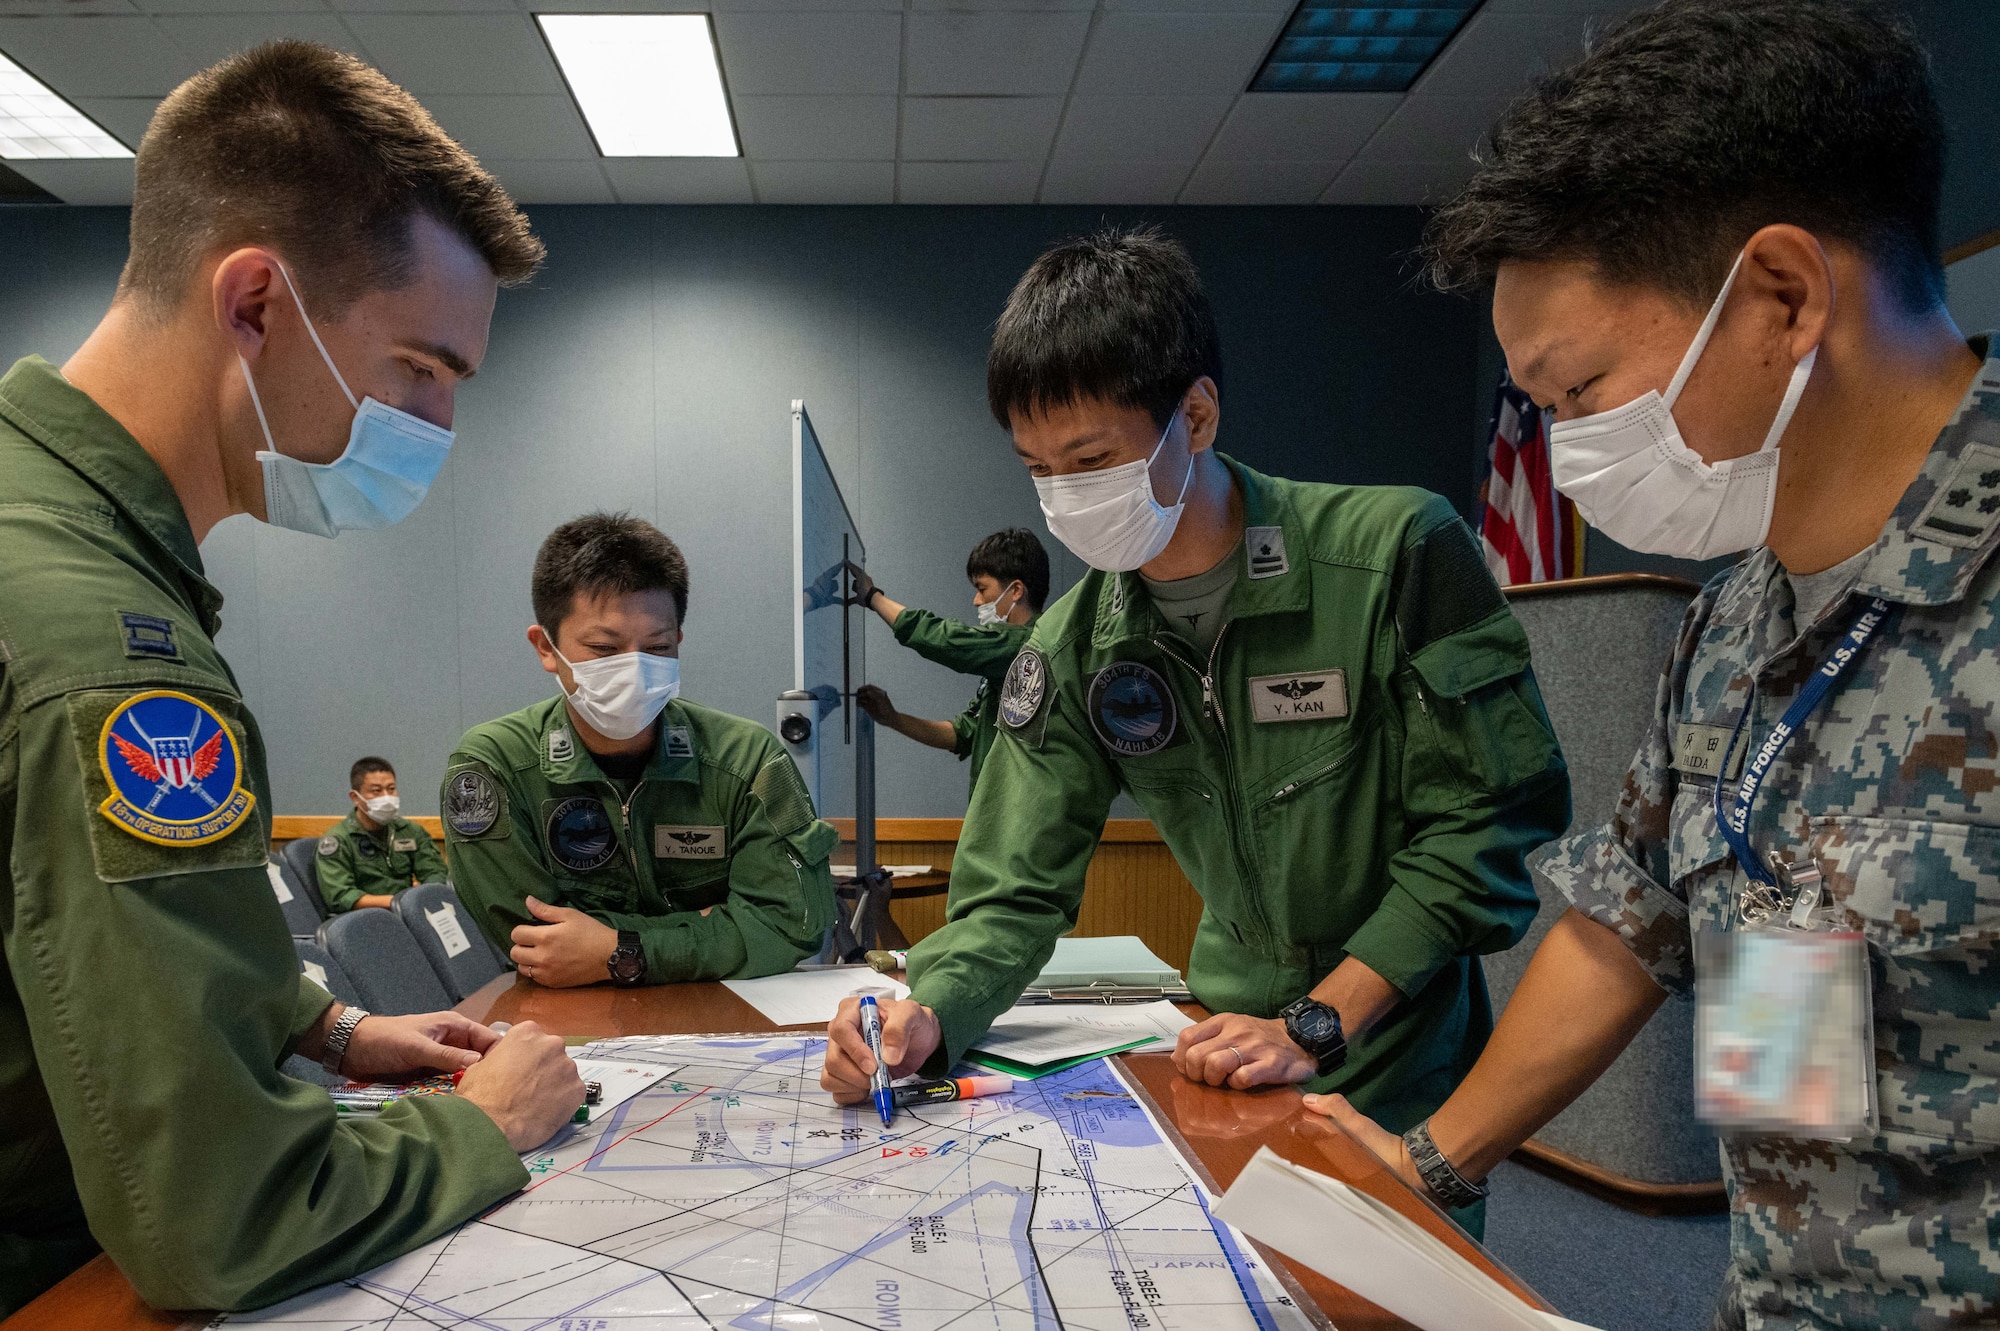 U.S. Air Force Capt. Robert Banicki, 18th Operations Support Squadron bilateral liaison, and Japan Air Self-Defense Force members mission plan during Exercise Southern Beach at Kadena Air Base, Japan, Oct. 25, 2021. Exercise Southern Beach is a large-scale Japan-U.S. joint training effort. (U.S. Air Force photo by Airman 1st Class Yosselin Perla)